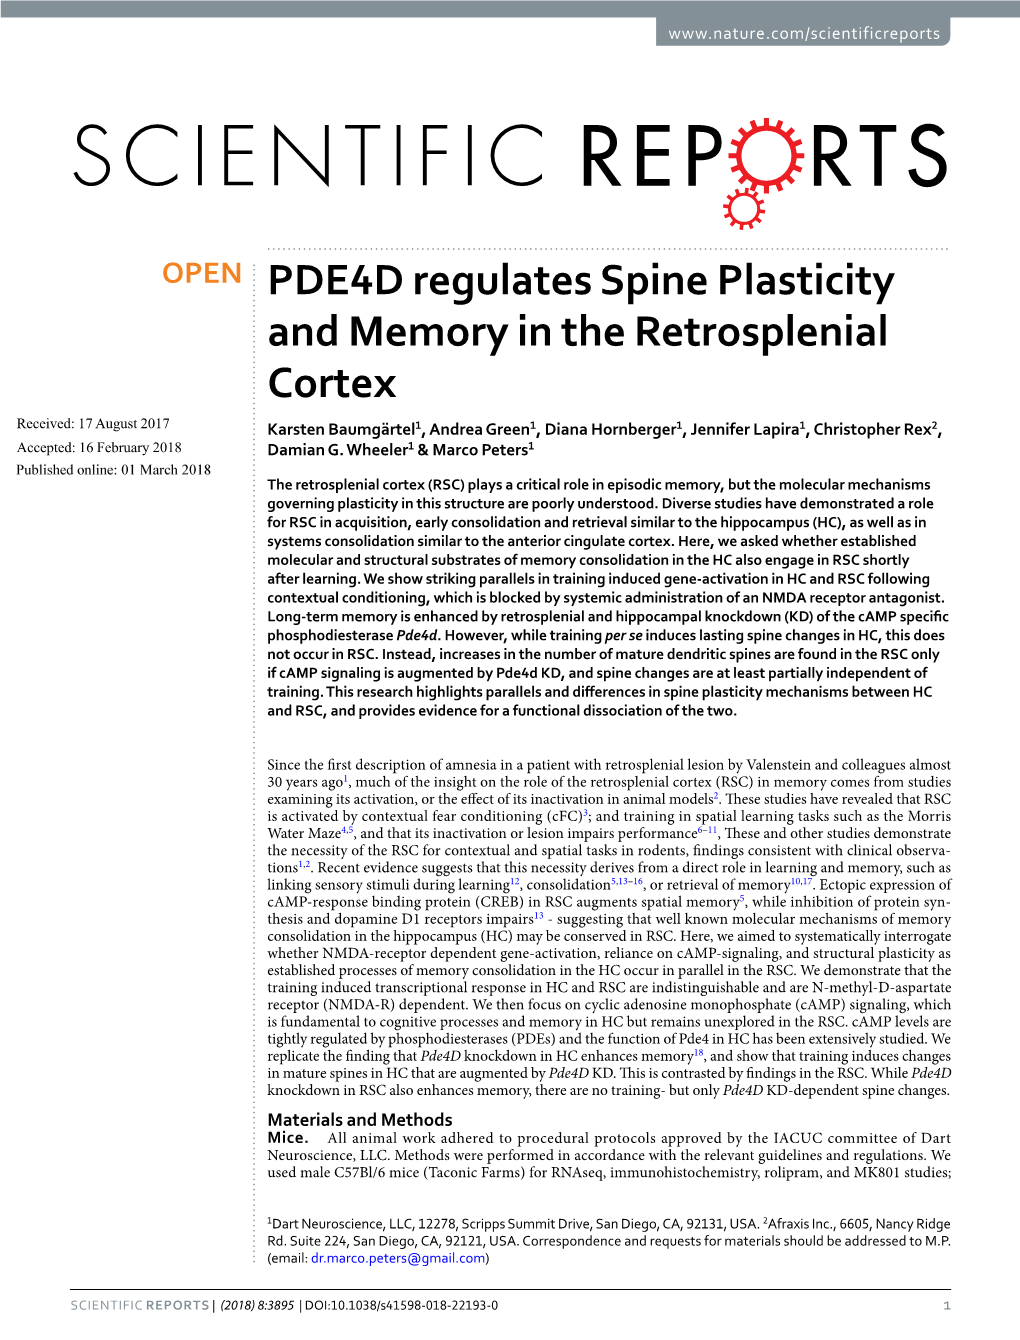 PDE4D Regulates Spine Plasticity and Memory in the Retrosplenial Cortex